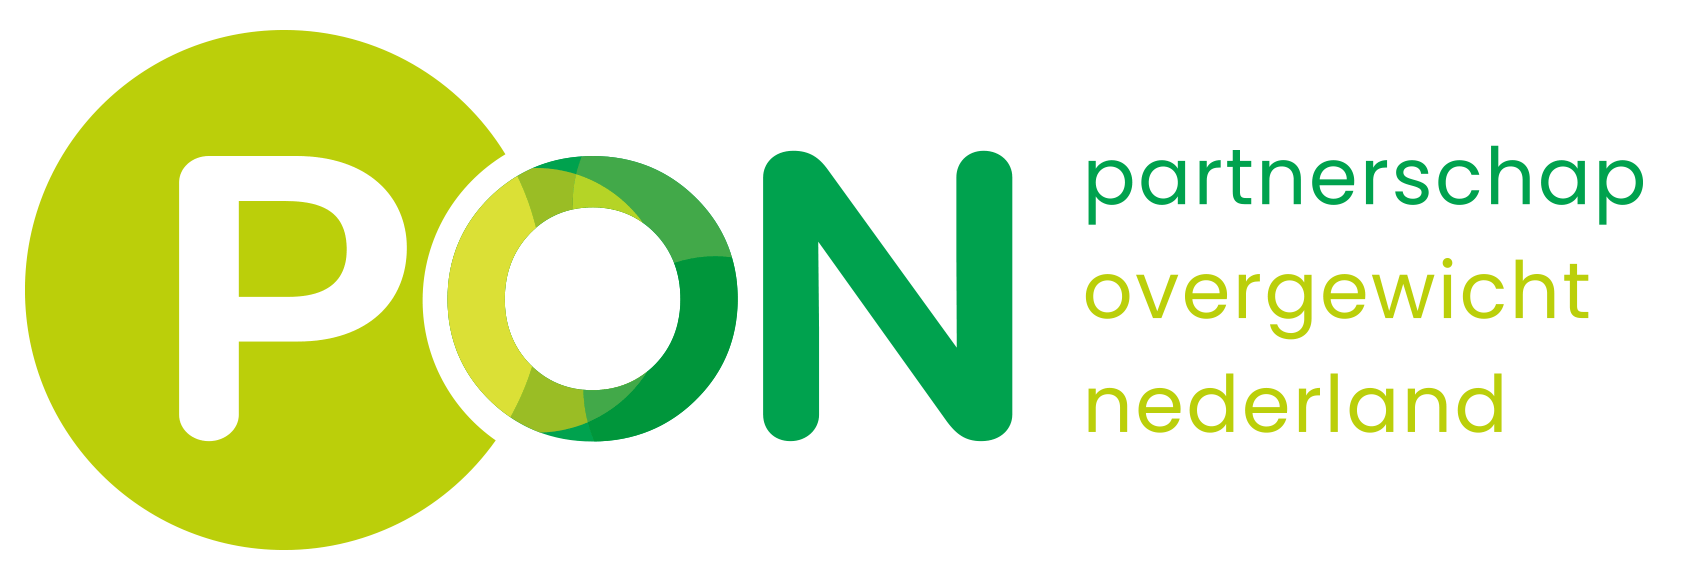 Logo of partnership overgewicht nederland (pon), featuring a large green circle with the acronym 'pon' in white and green letters, alongside the full name in green text.